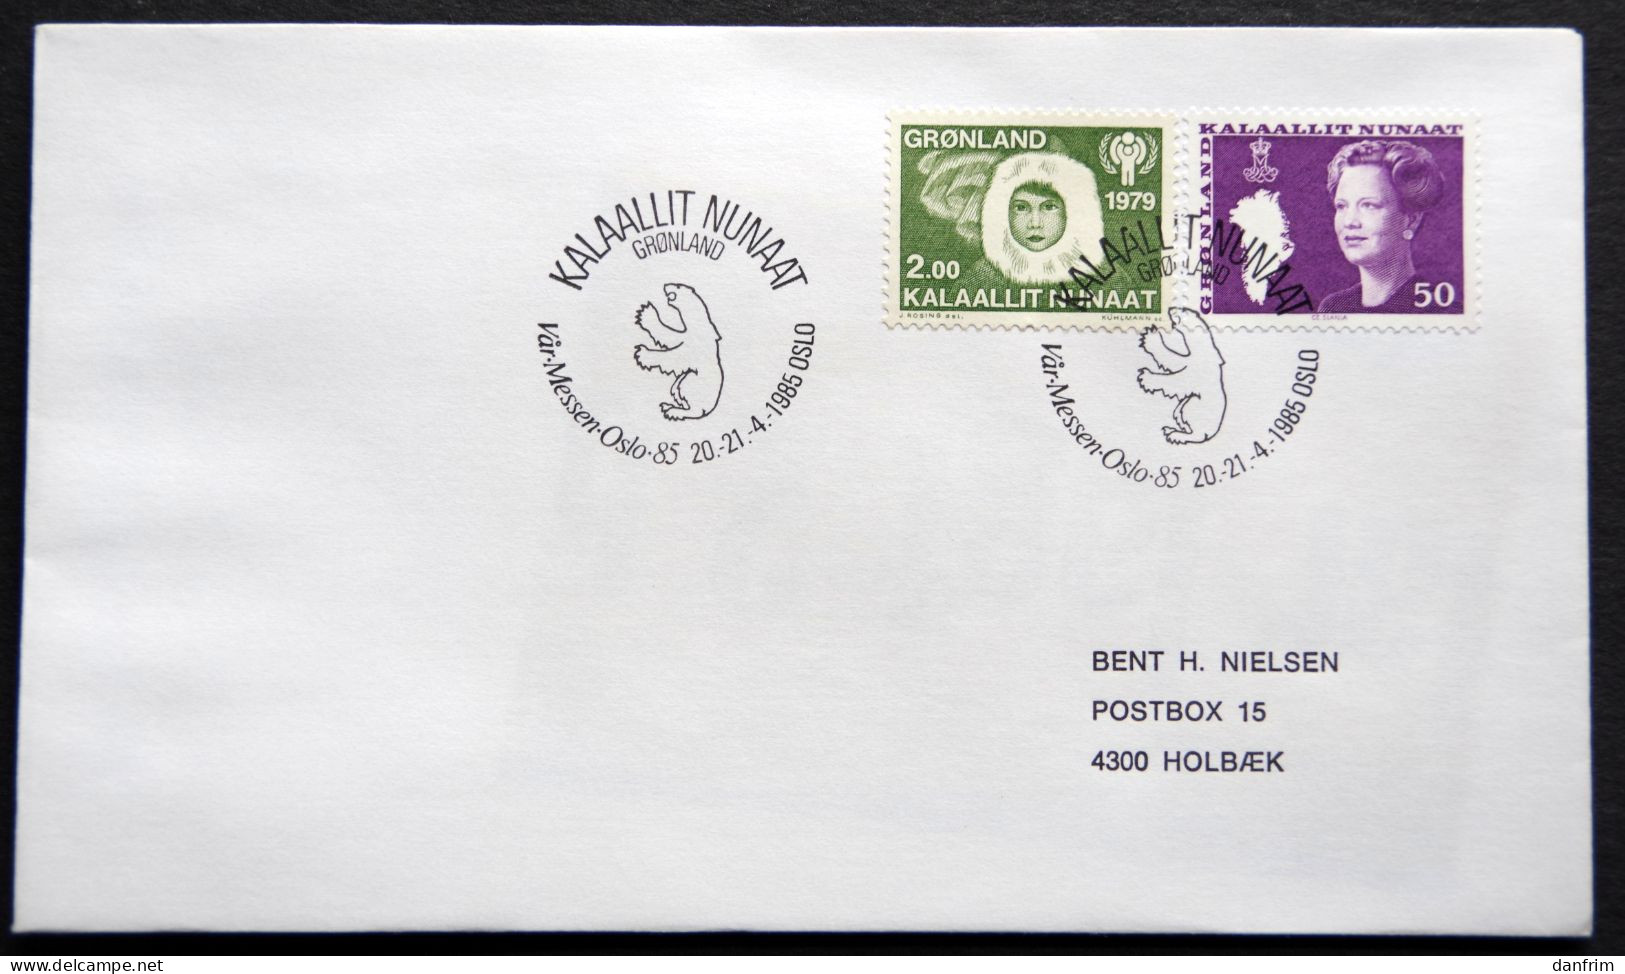 Greenland 1985 SPECIAL POSTMARKS. VÅR.MESSEN-OSLO 85.   20-21-4 OSLO ( Lot 916) - Covers & Documents